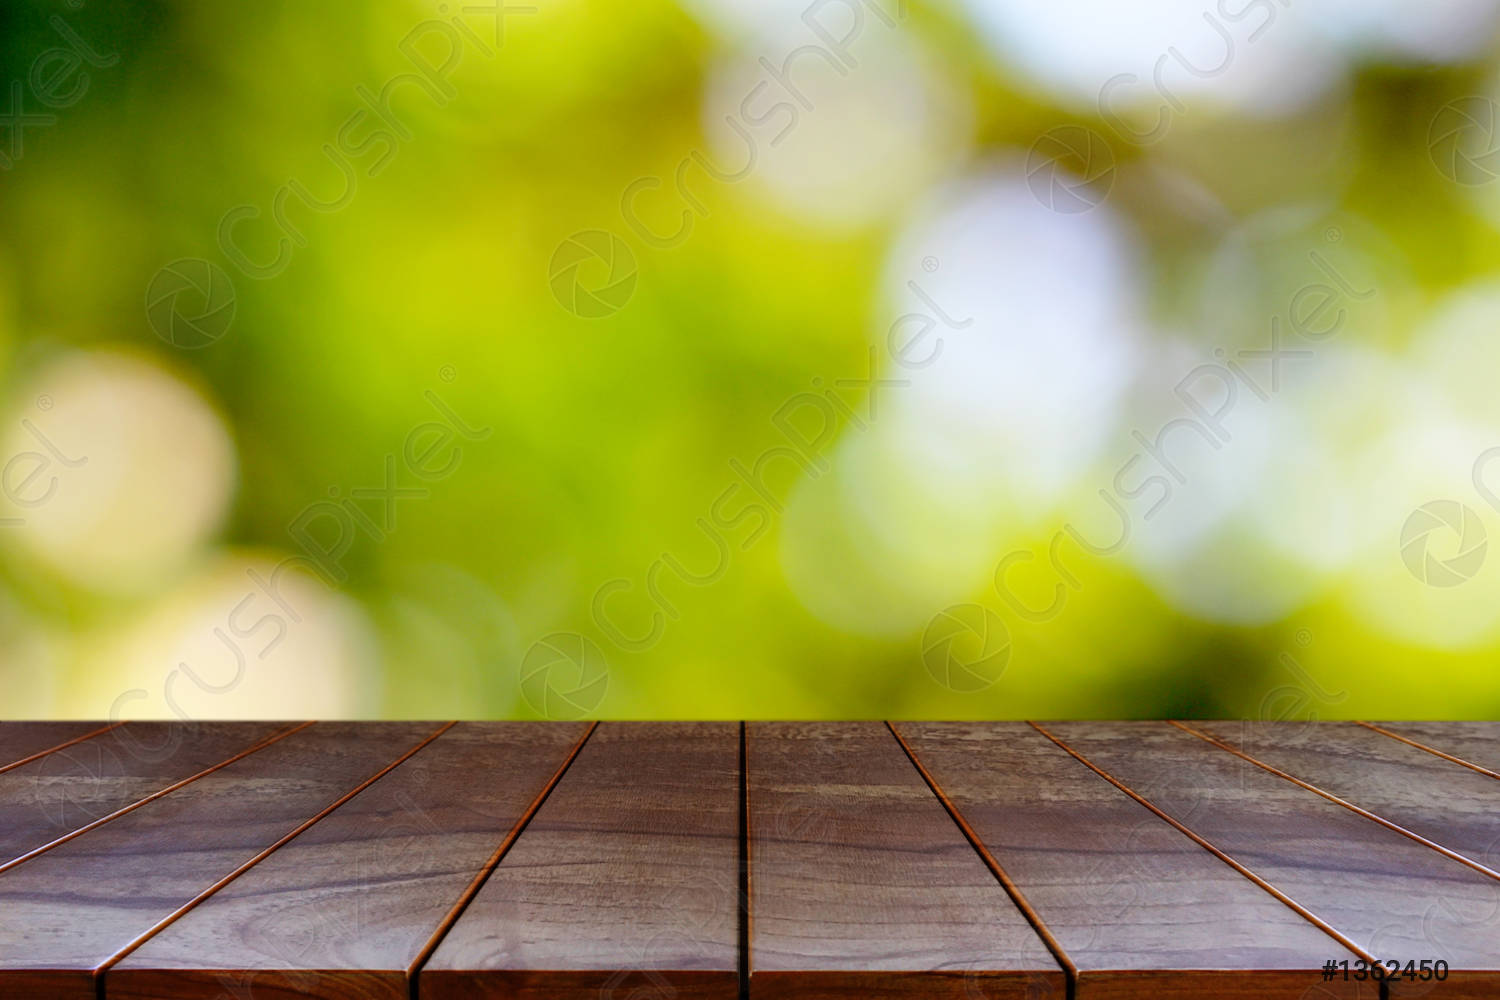 wooden-table-on-natural-background-1362450